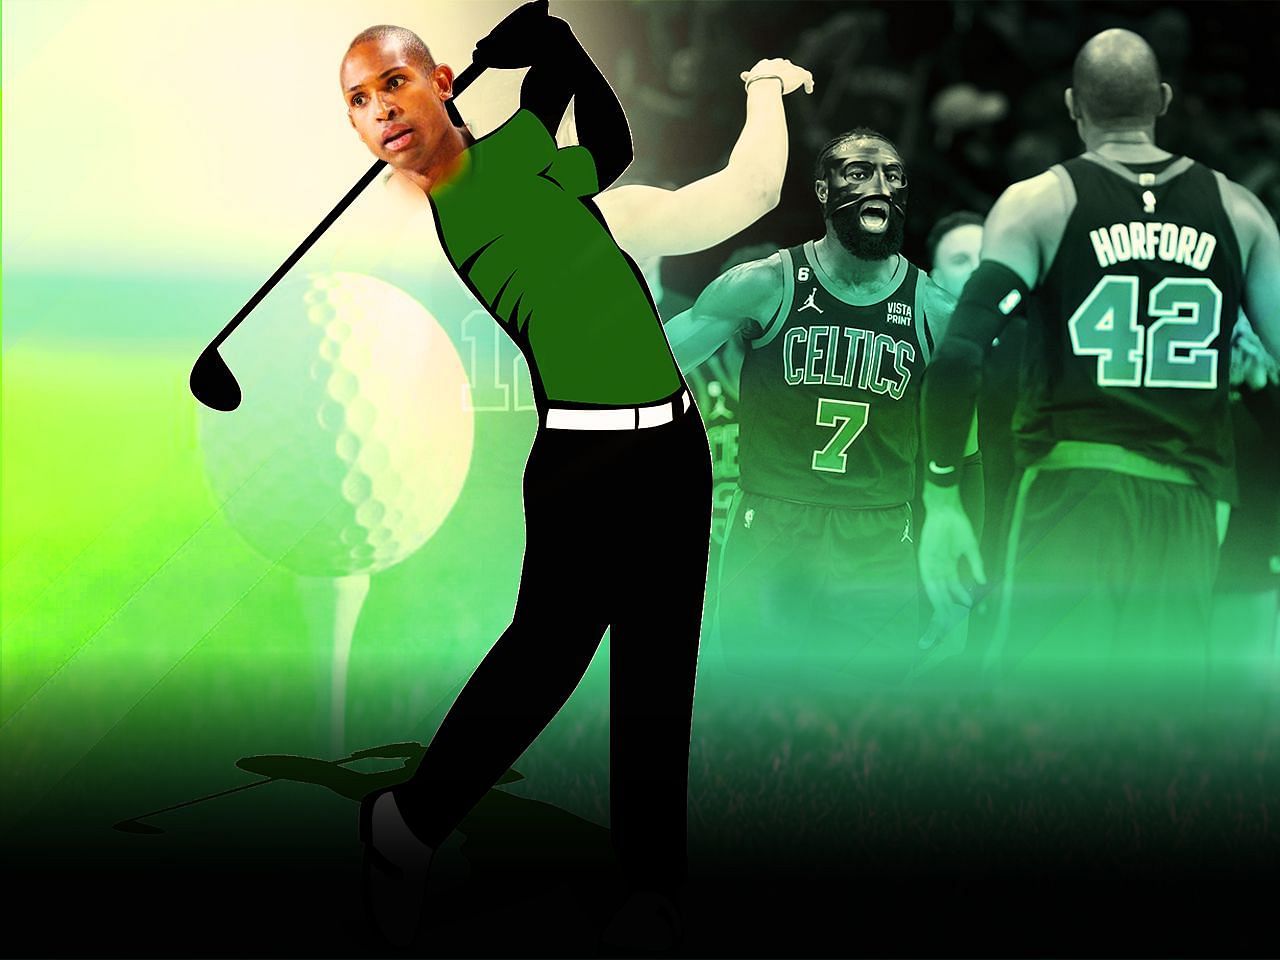 The embattled Boston Celtics, led by Al Horford, decided to play golf before Game 4 of the Eastern Conference Finals against the Miami Heat.